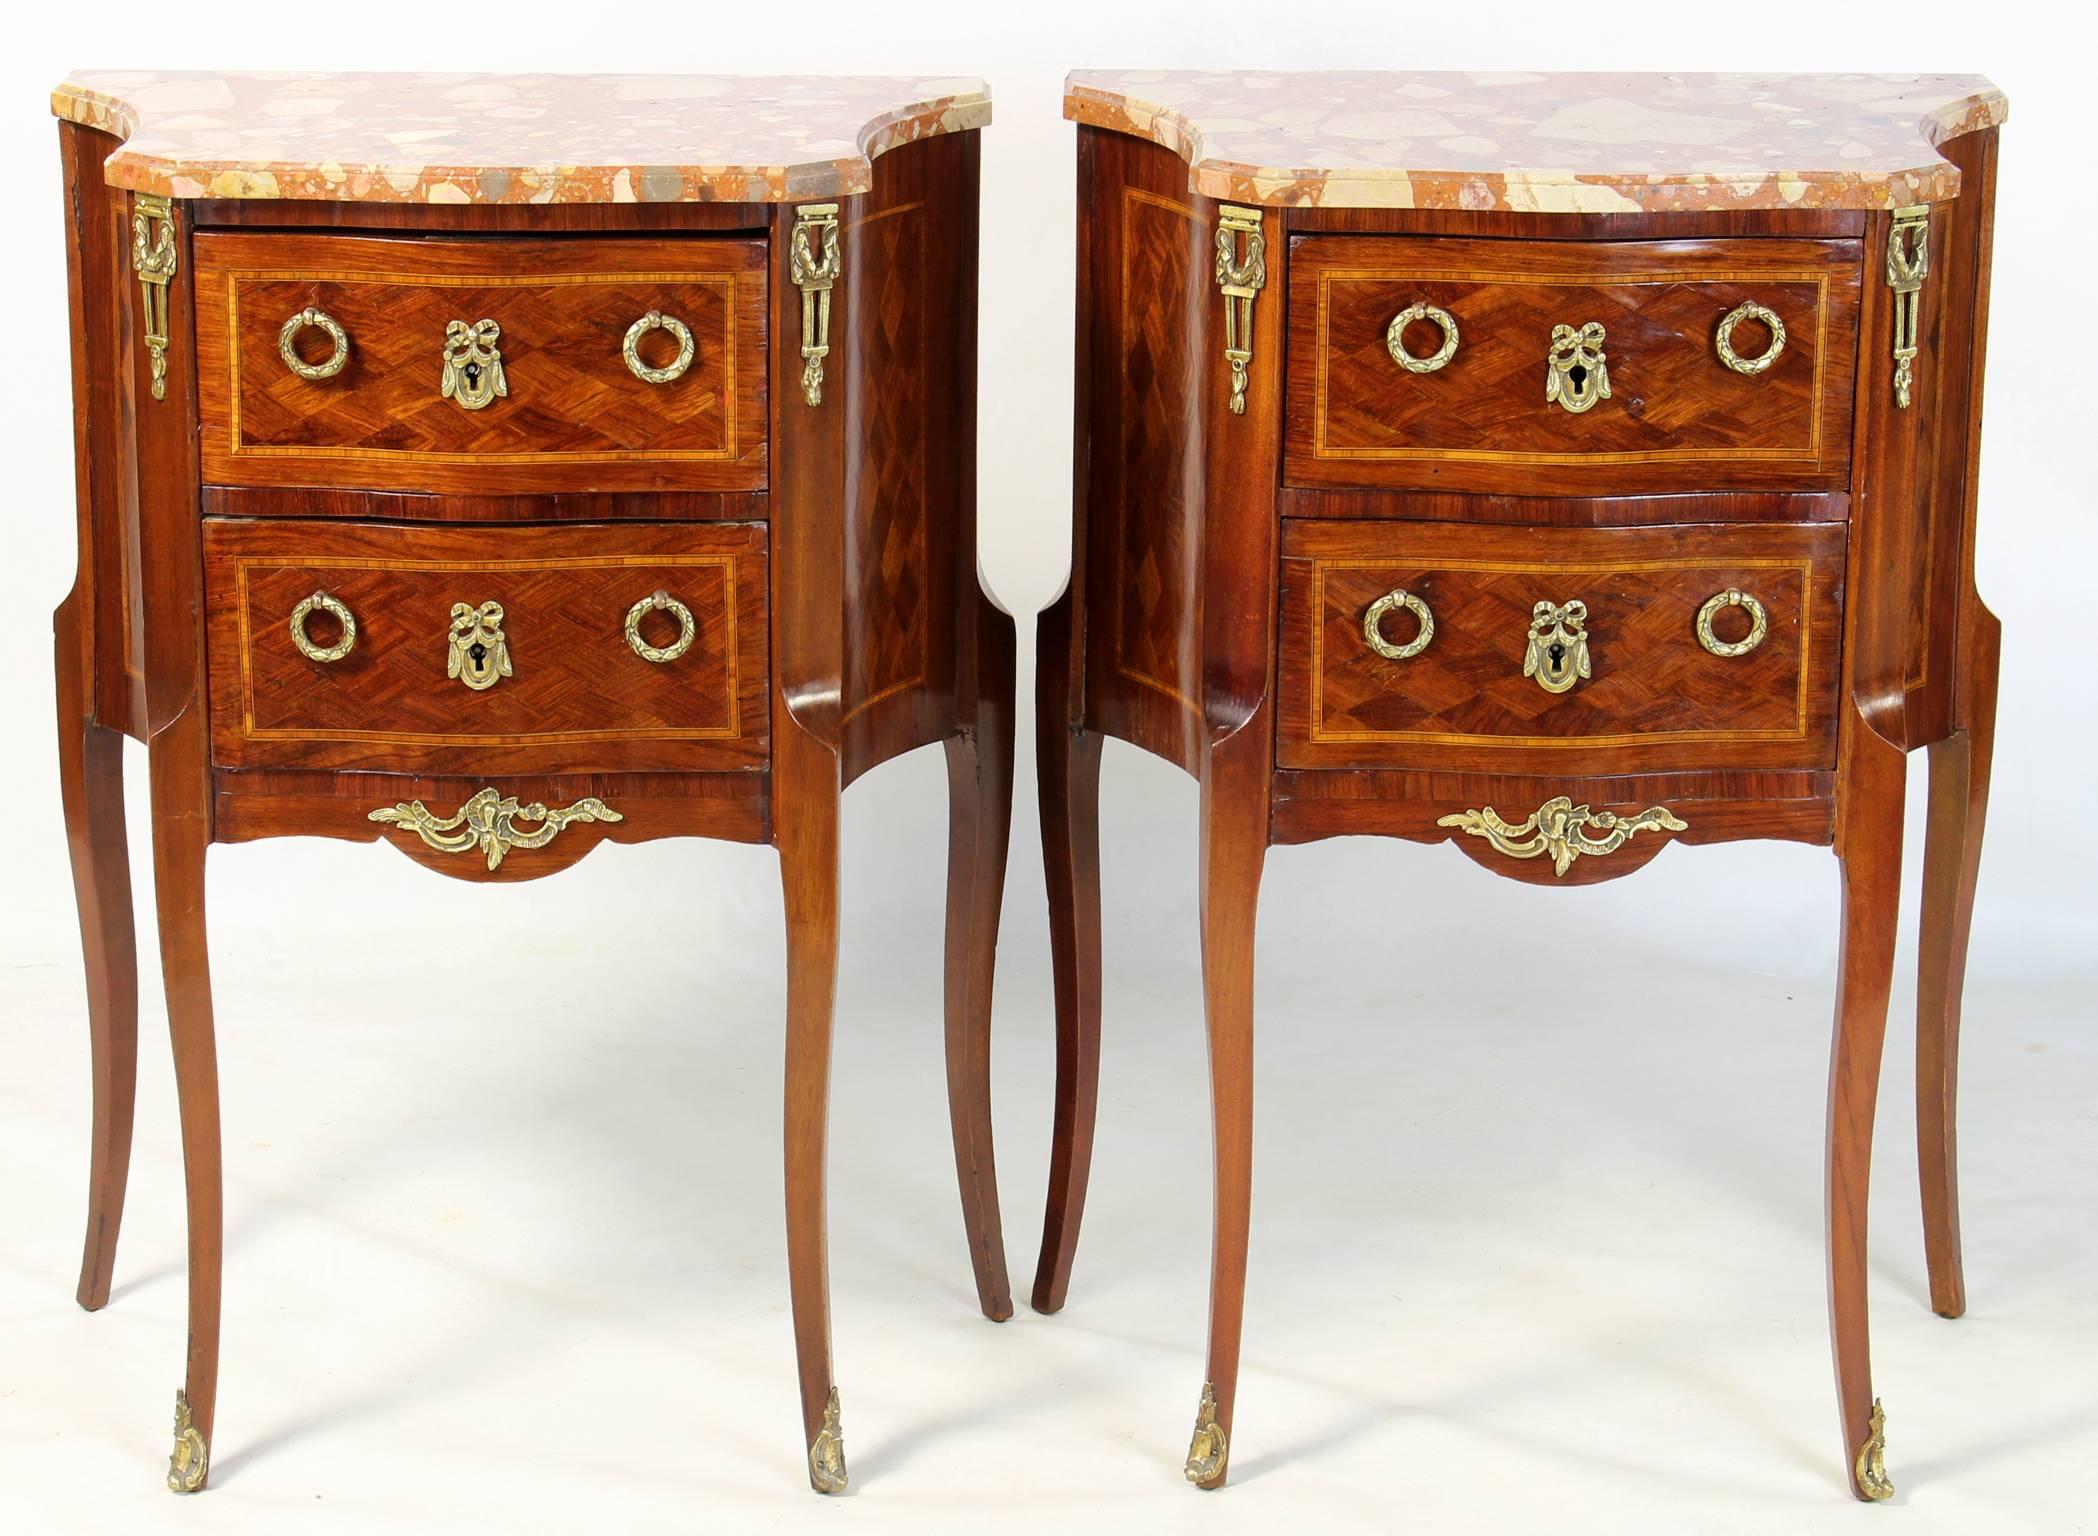 A lovely pair of early 20th C. French inlaid marquetry two-drawer bedside tables with marble tops.